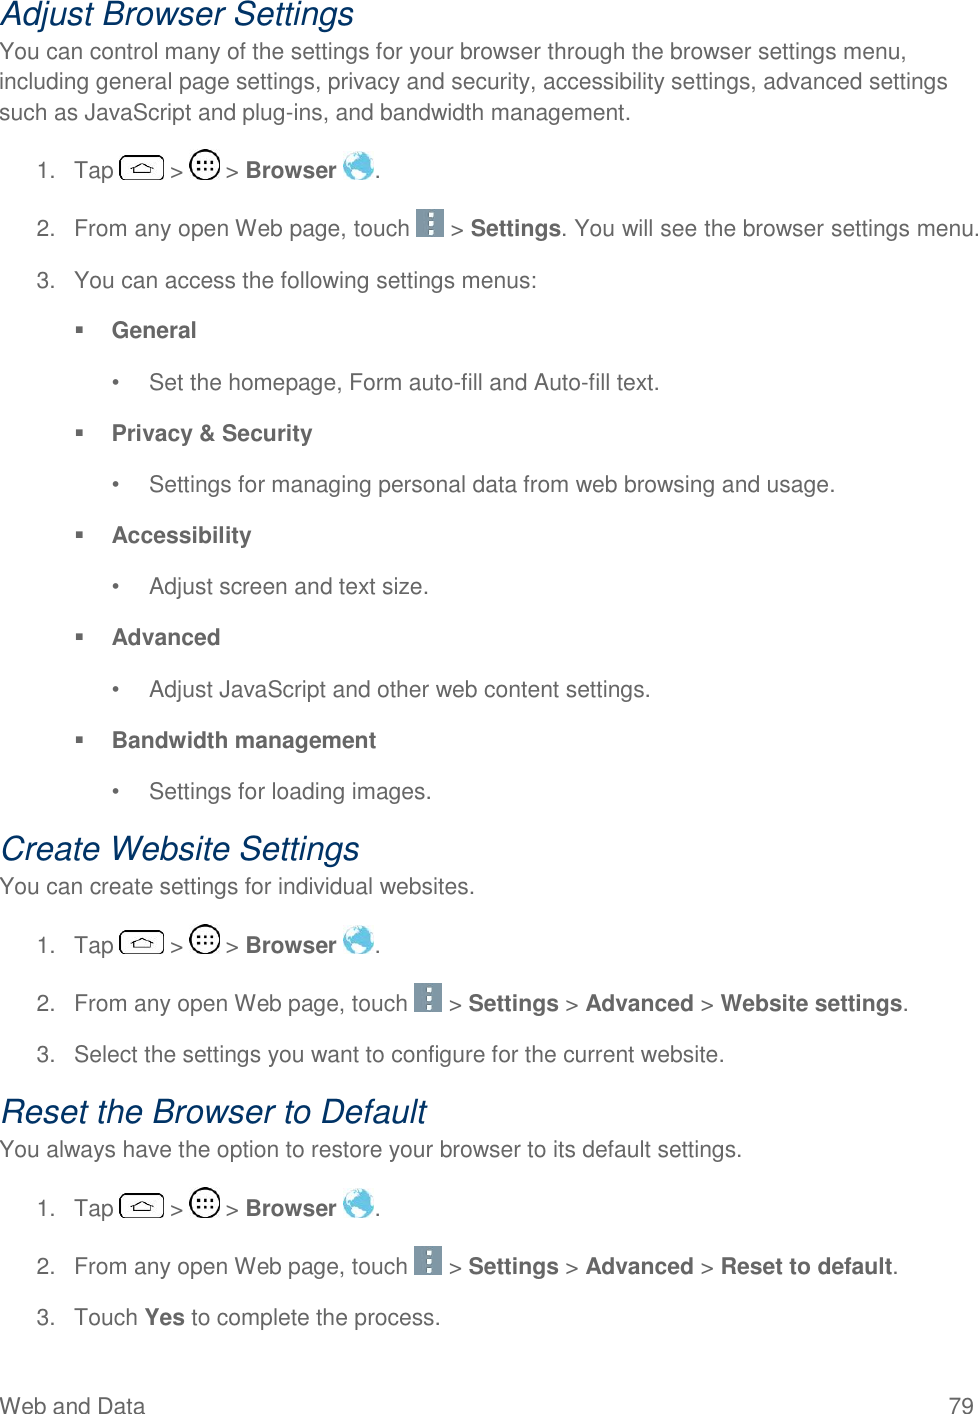 Web and Data  79 Adjust Browser Settings You can control many of the settings for your browser through the browser settings menu, including general page settings, privacy and security, accessibility settings, advanced settings such as JavaScript and plug-ins, and bandwidth management. 1.  Tap   &gt;   &gt; Browser  . 2.  From any open Web page, touch   &gt; Settings. You will see the browser settings menu. 3.  You can access the following settings menus:  General  •  Set the homepage, Form auto-fill and Auto-fill text.   Privacy &amp; Security  •  Settings for managing personal data from web browsing and usage.   Accessibility  •  Adjust screen and text size.  Advanced  •  Adjust JavaScript and other web content settings.   Bandwidth management  •  Settings for loading images.  Create Website Settings You can create settings for individual websites. 1.  Tap   &gt;   &gt; Browser  . 2.  From any open Web page, touch   &gt; Settings &gt; Advanced &gt; Website settings. 3.  Select the settings you want to configure for the current website. Reset the Browser to Default You always have the option to restore your browser to its default settings. 1.  Tap   &gt;   &gt; Browser  . 2.  From any open Web page, touch   &gt; Settings &gt; Advanced &gt; Reset to default. 3.  Touch Yes to complete the process.  